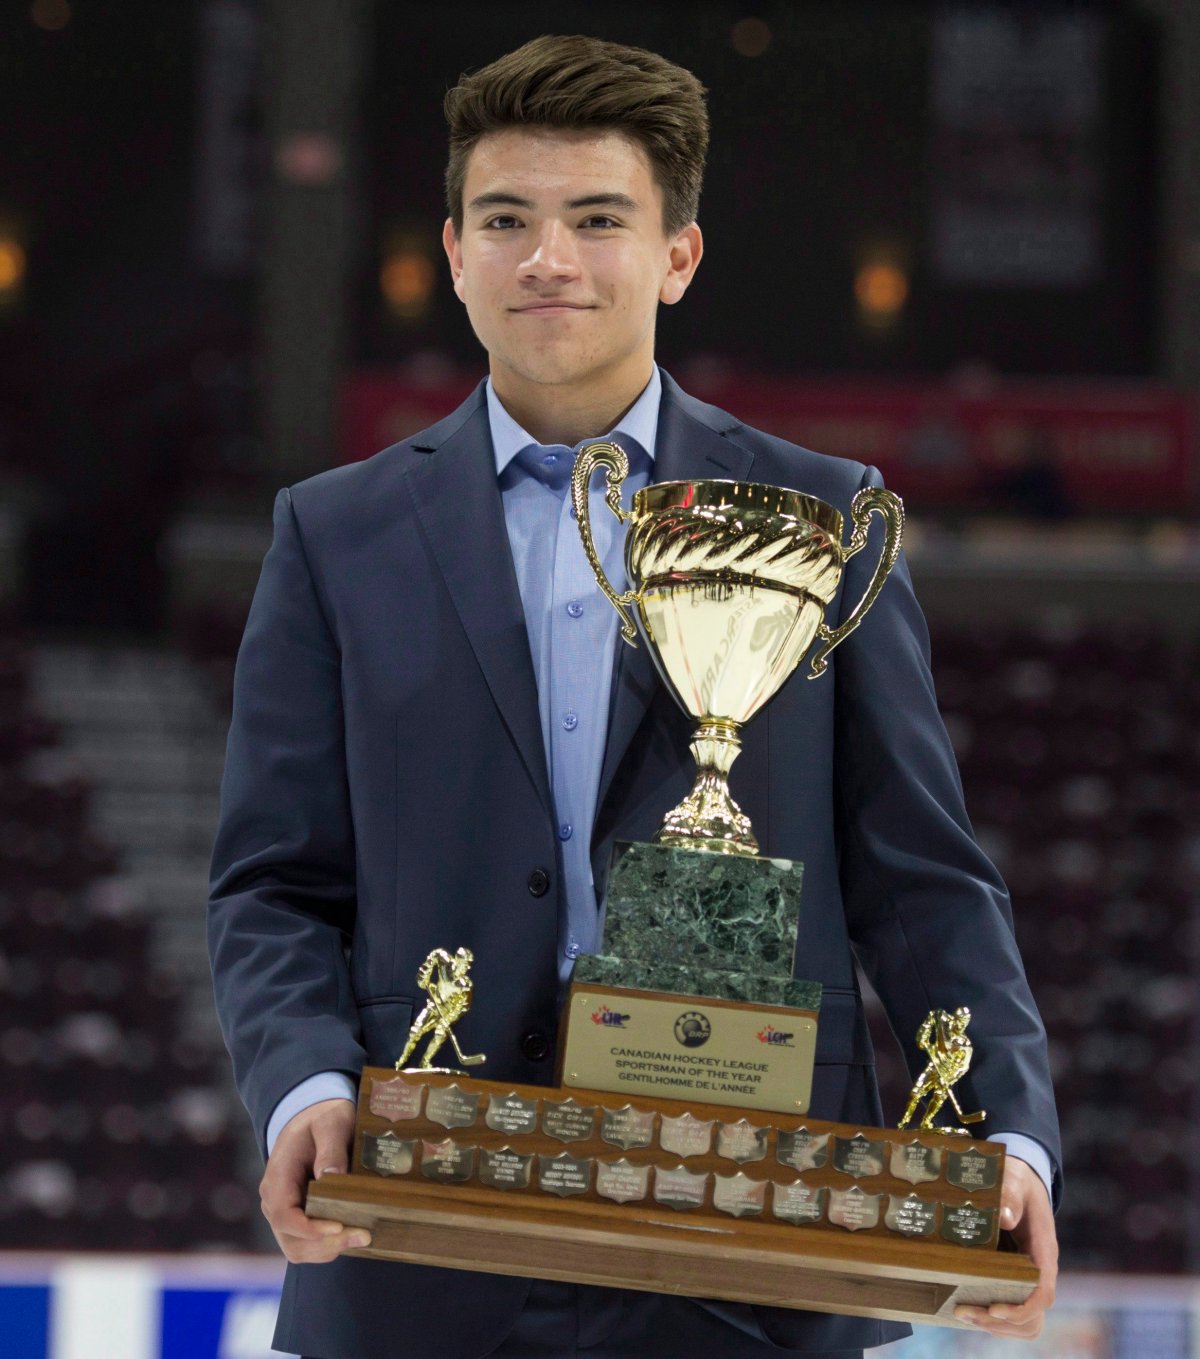 CHL Sportsman of the Year award recipient Nick Suzuki from the Owen Sound Attack holds his trophy following a media availability at the Memorial Cup Saturday May 27, 2017 in Windsor.